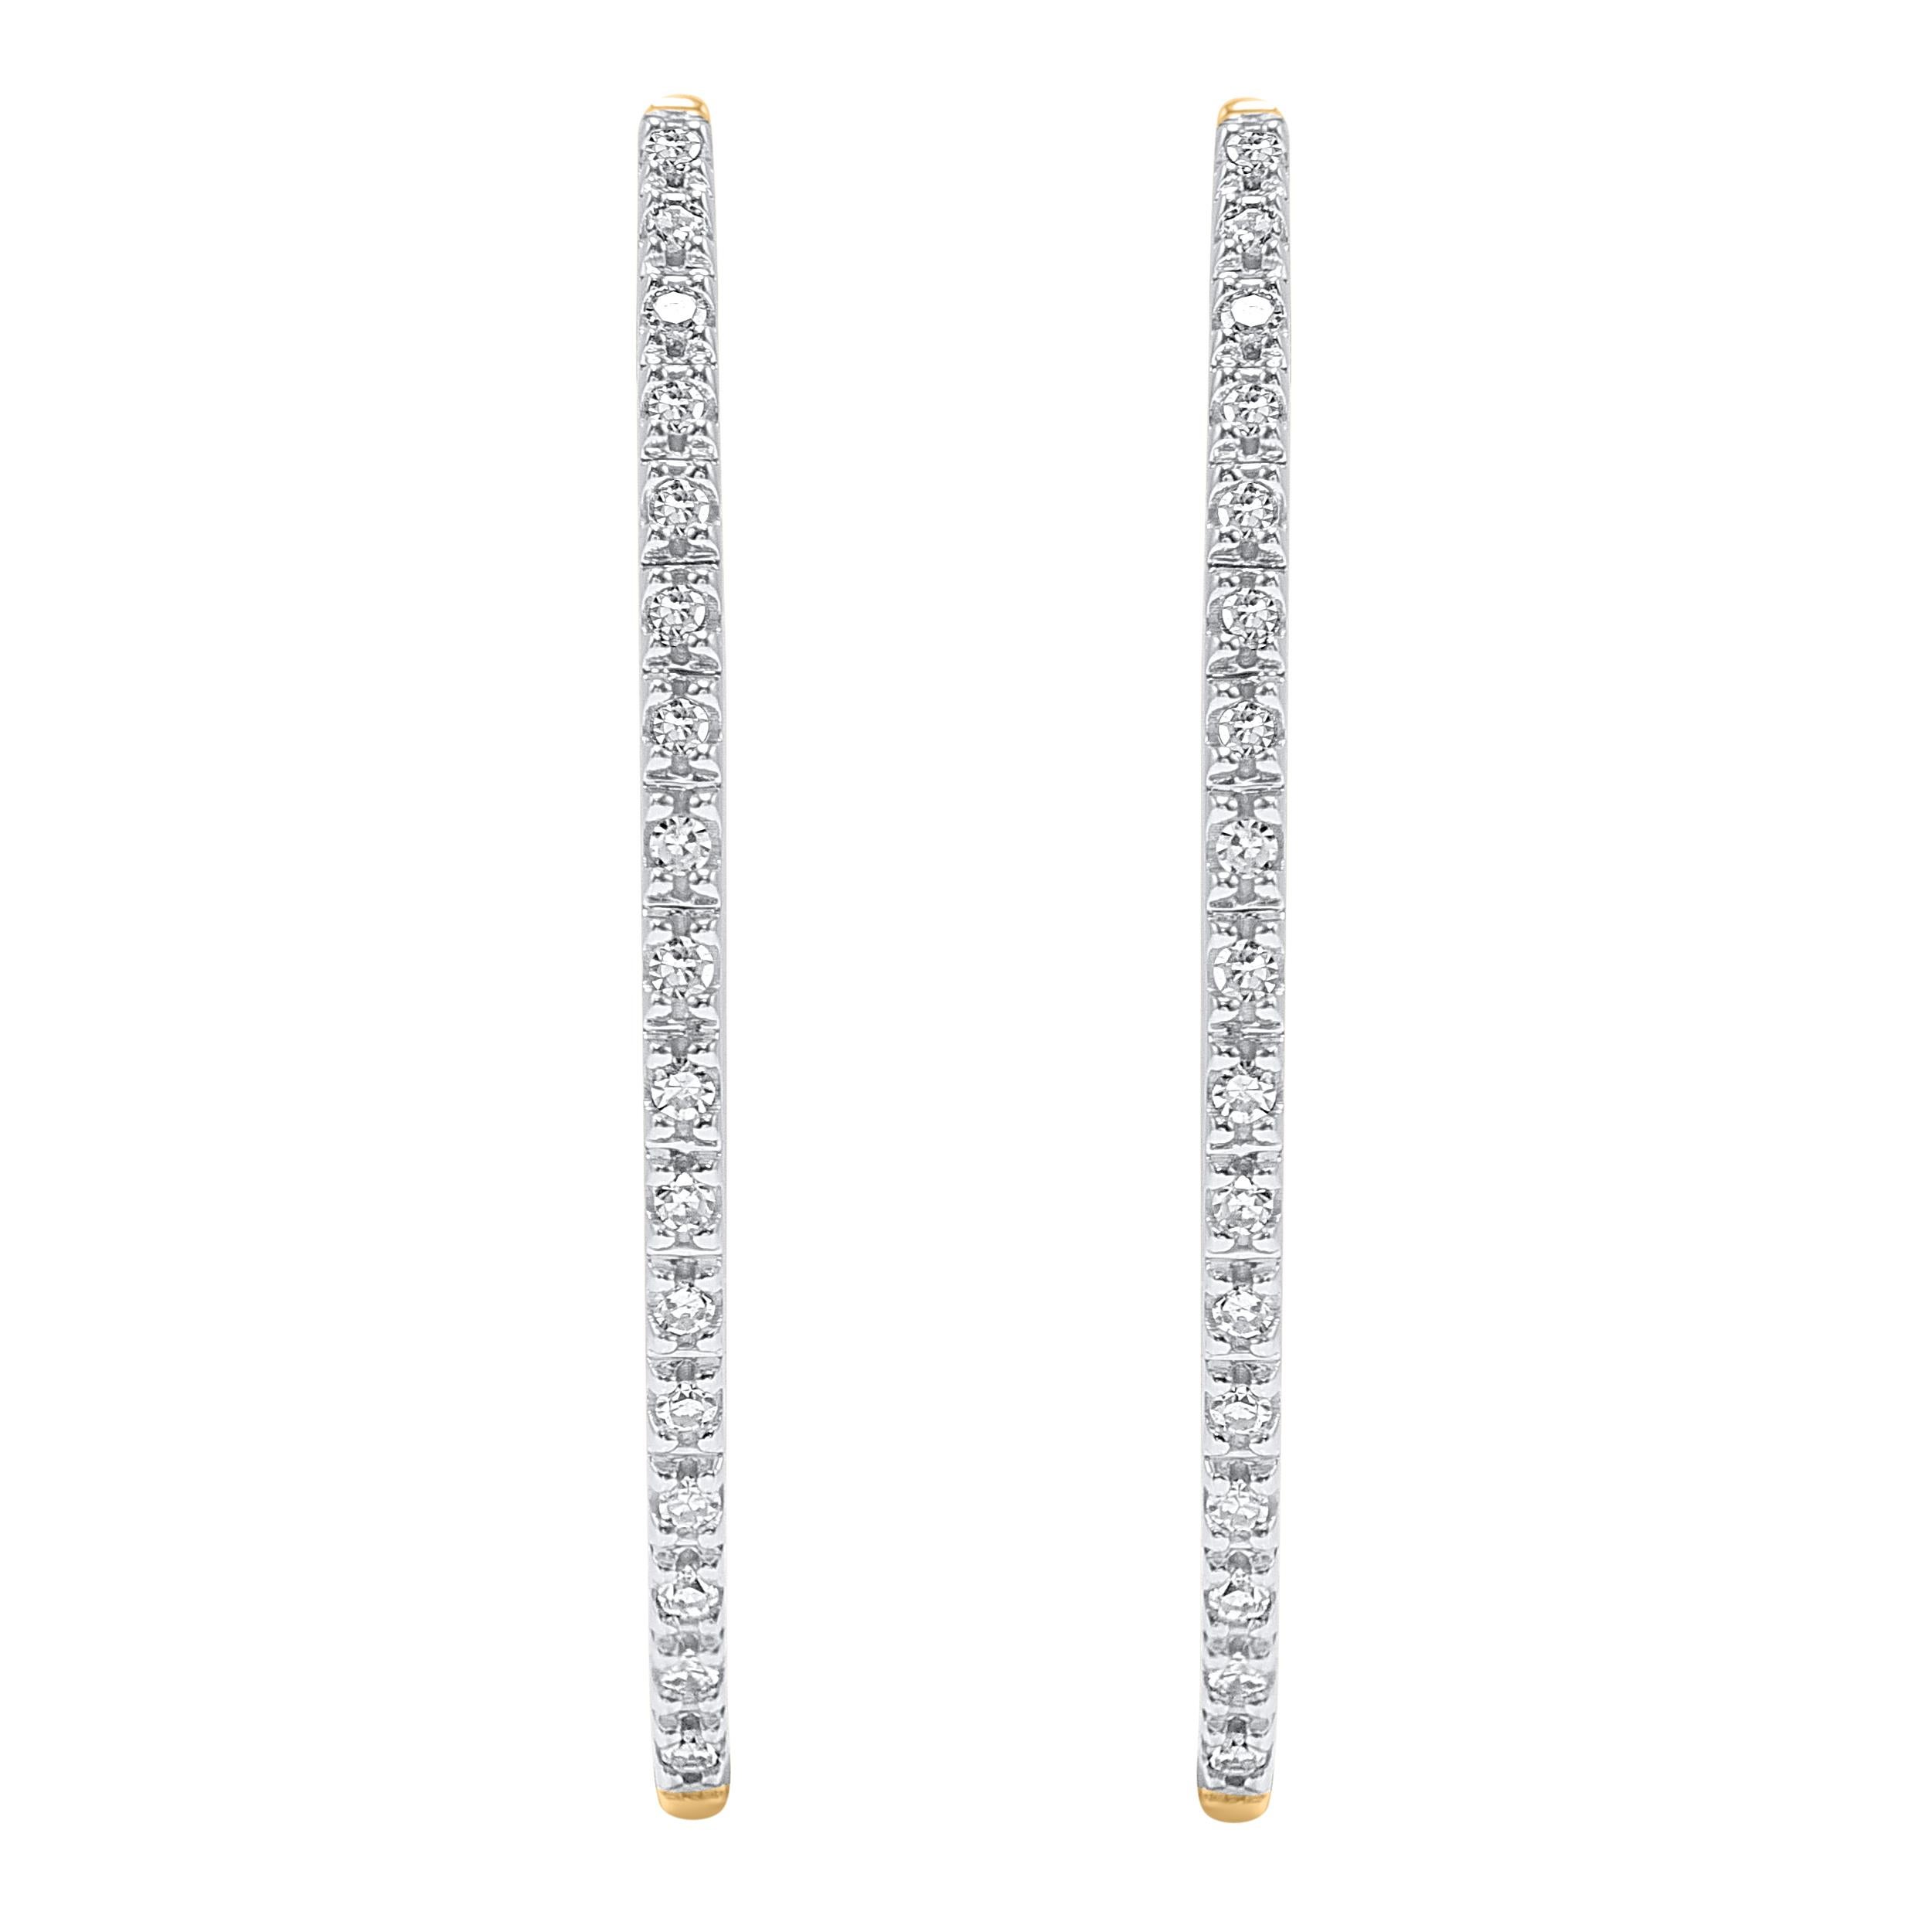 Bring charm to your look with this diamond hoop earrings. This earring is beautifully designed and studded with 34 single cut round diamond in prong setting. The total diamond weight is 0.15 carat. The diamonds are graded as H-I color and I-2